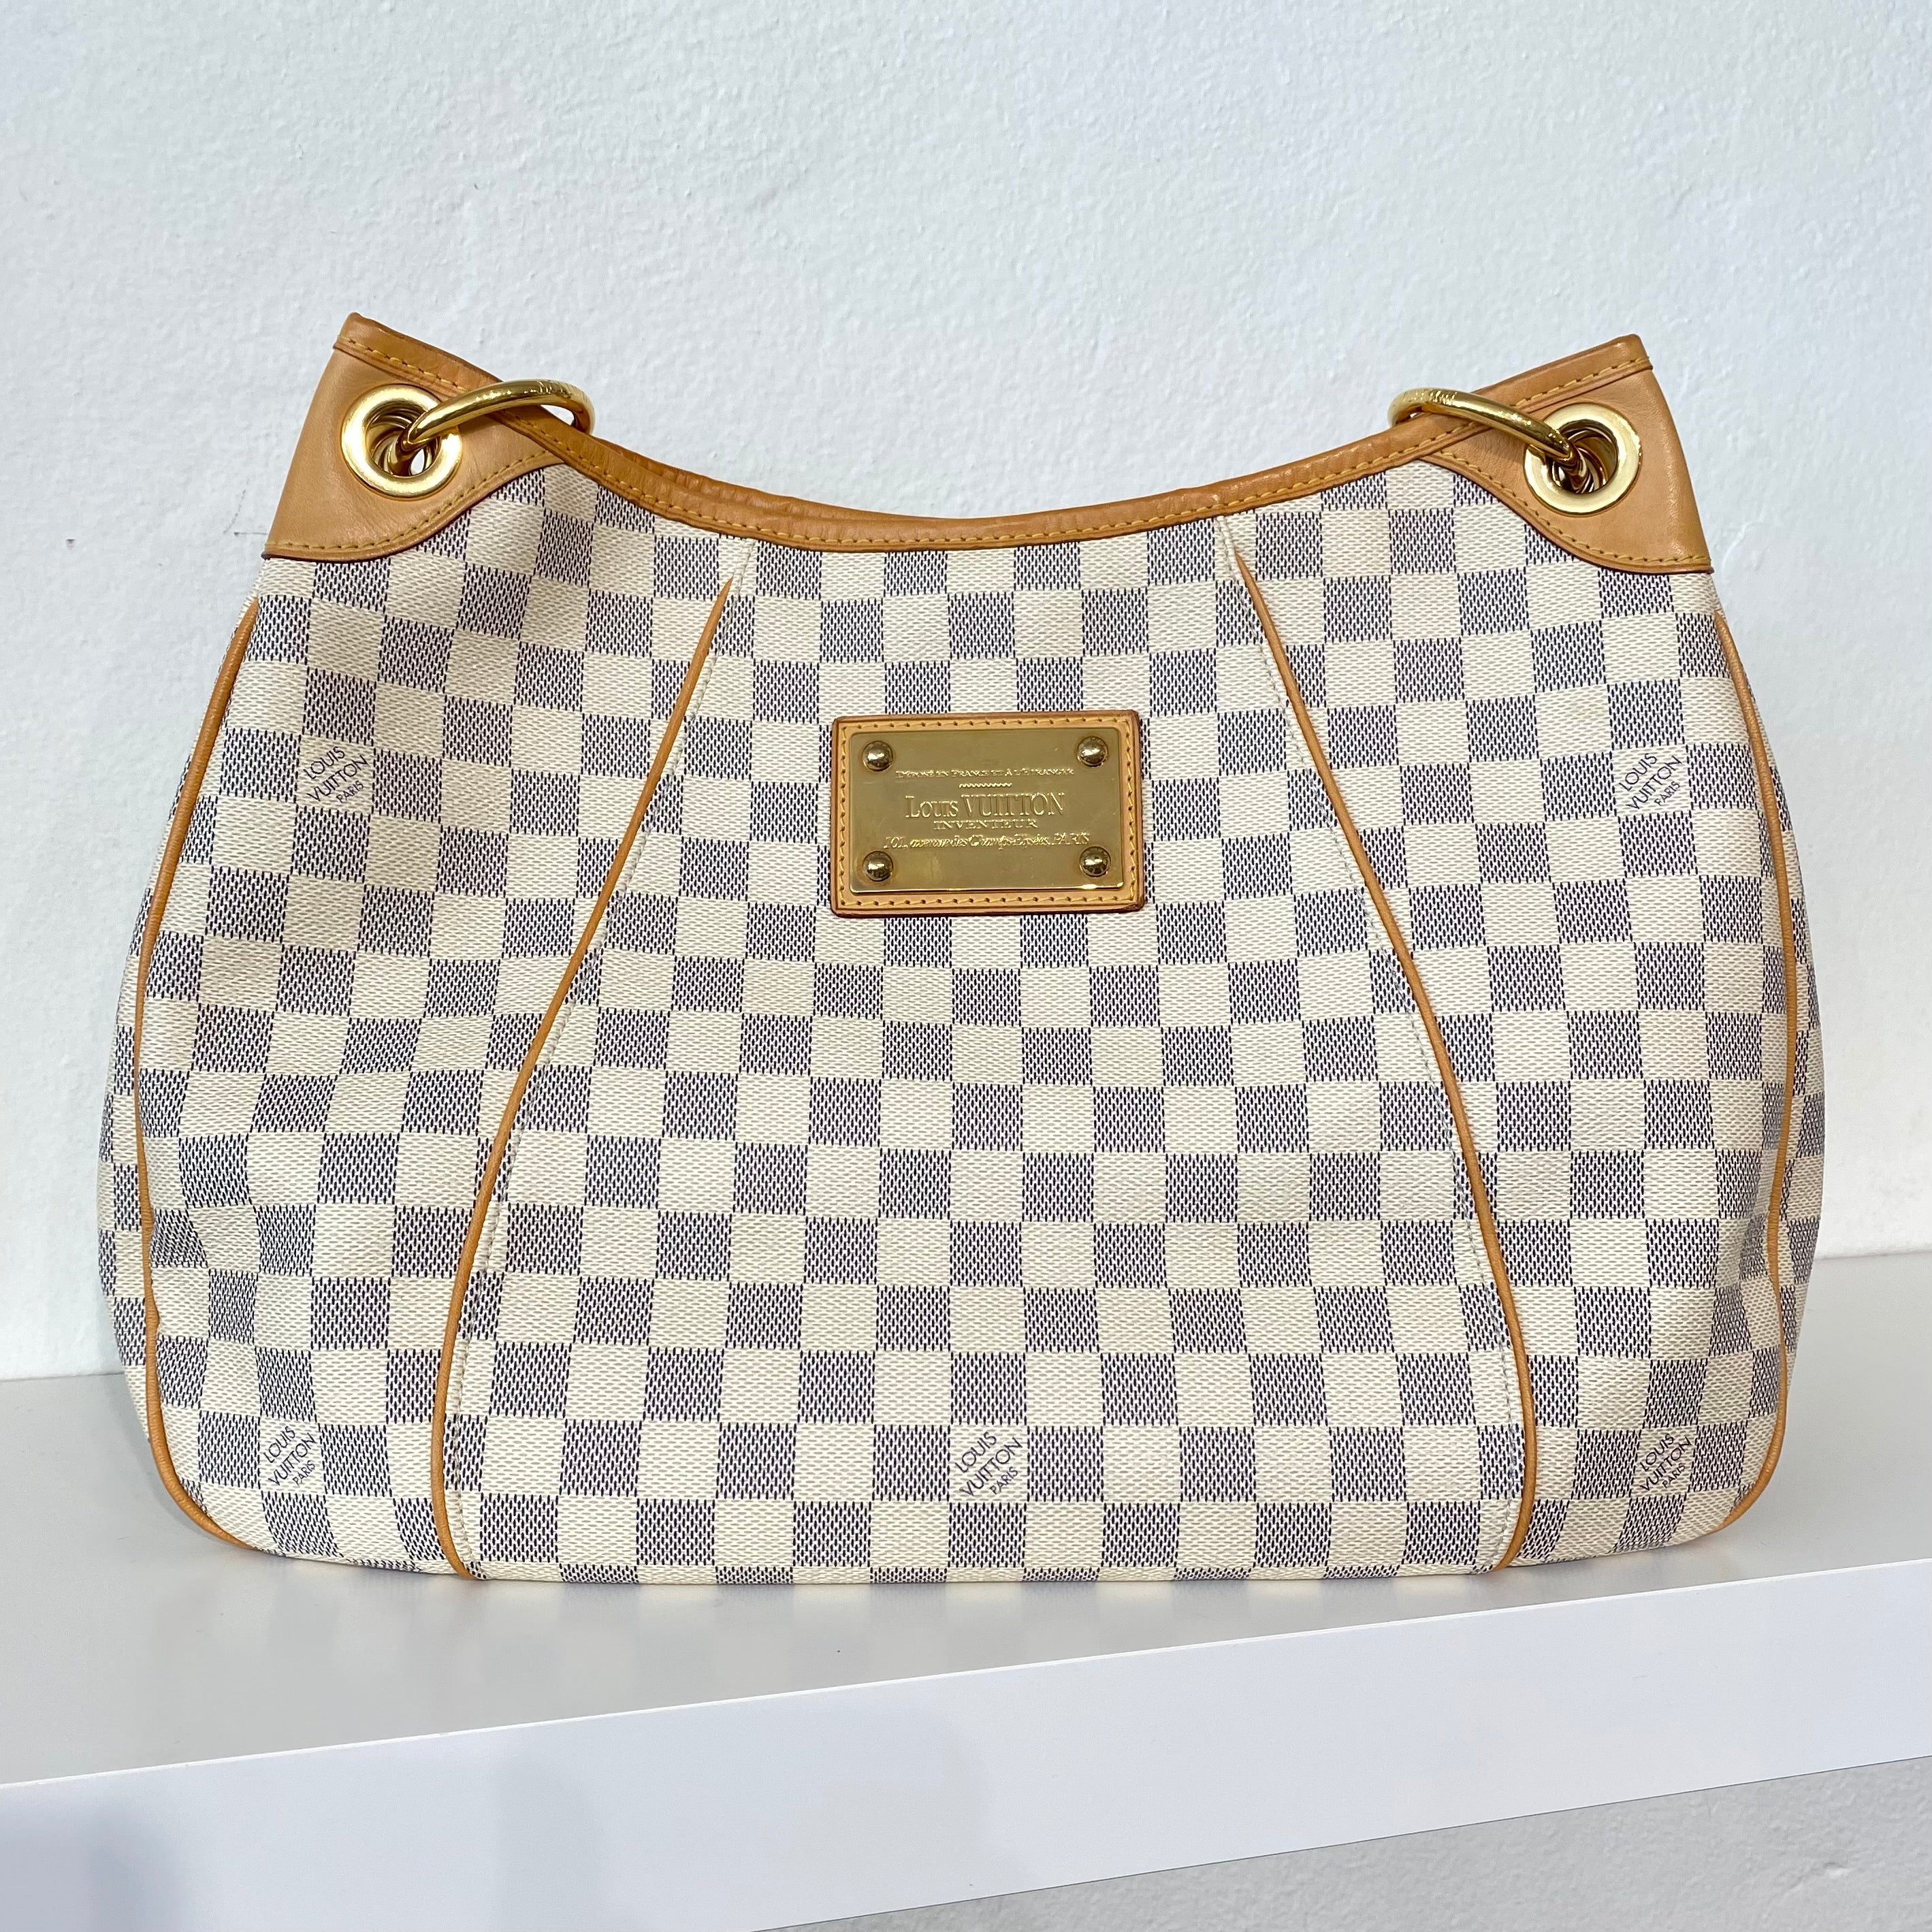 Brilliant Clothing Boutique - New staff favourite bag, the Louis Vuitton, Trevi  GM, more pics and details on site. $1695 www.brilliantclothing.ca # louisvuitton #damierebene #newarrivals#halifax #halifaxconsignment  #secondhandfirst #halifaxfashion